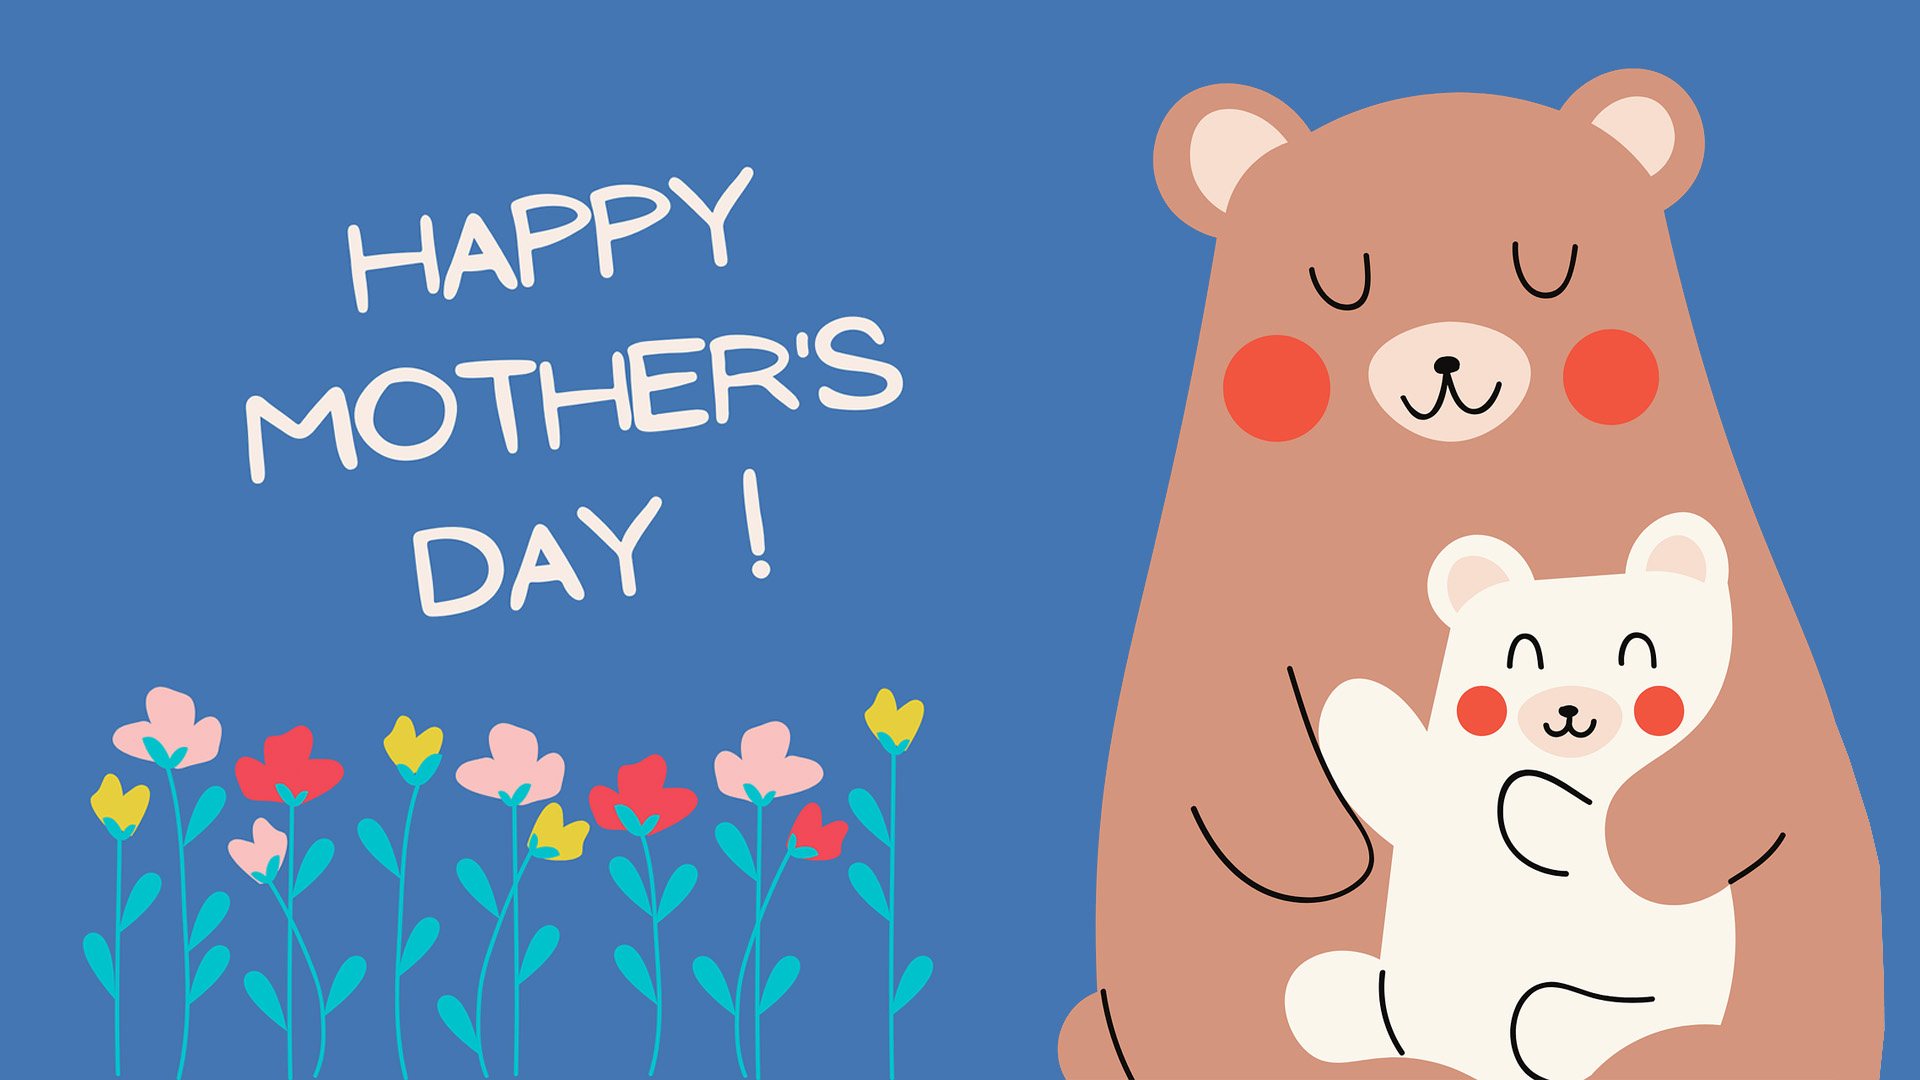 Blue background with a large brown teddy bear holding a smaller white teddy bear on the right side of the graphic. Happy Mother's Day is written in white font on the left side of the image and pink, red, and yellow flowers are along side the bottom left side of the image.